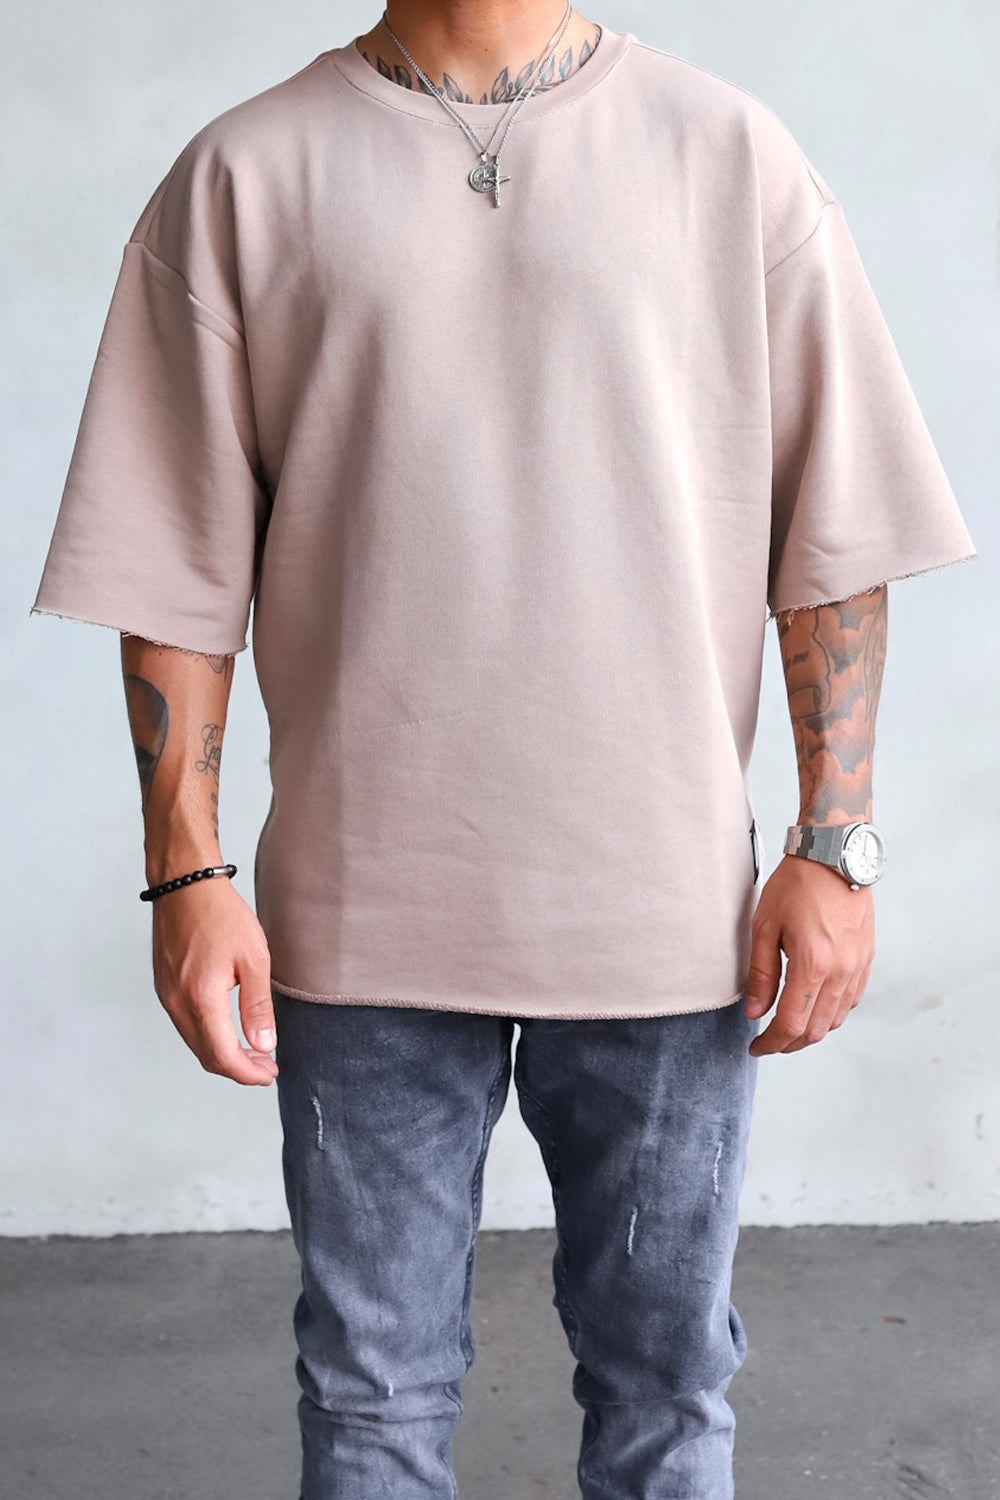 Oversized Cropped T-Shirt T-6049-1 Beige